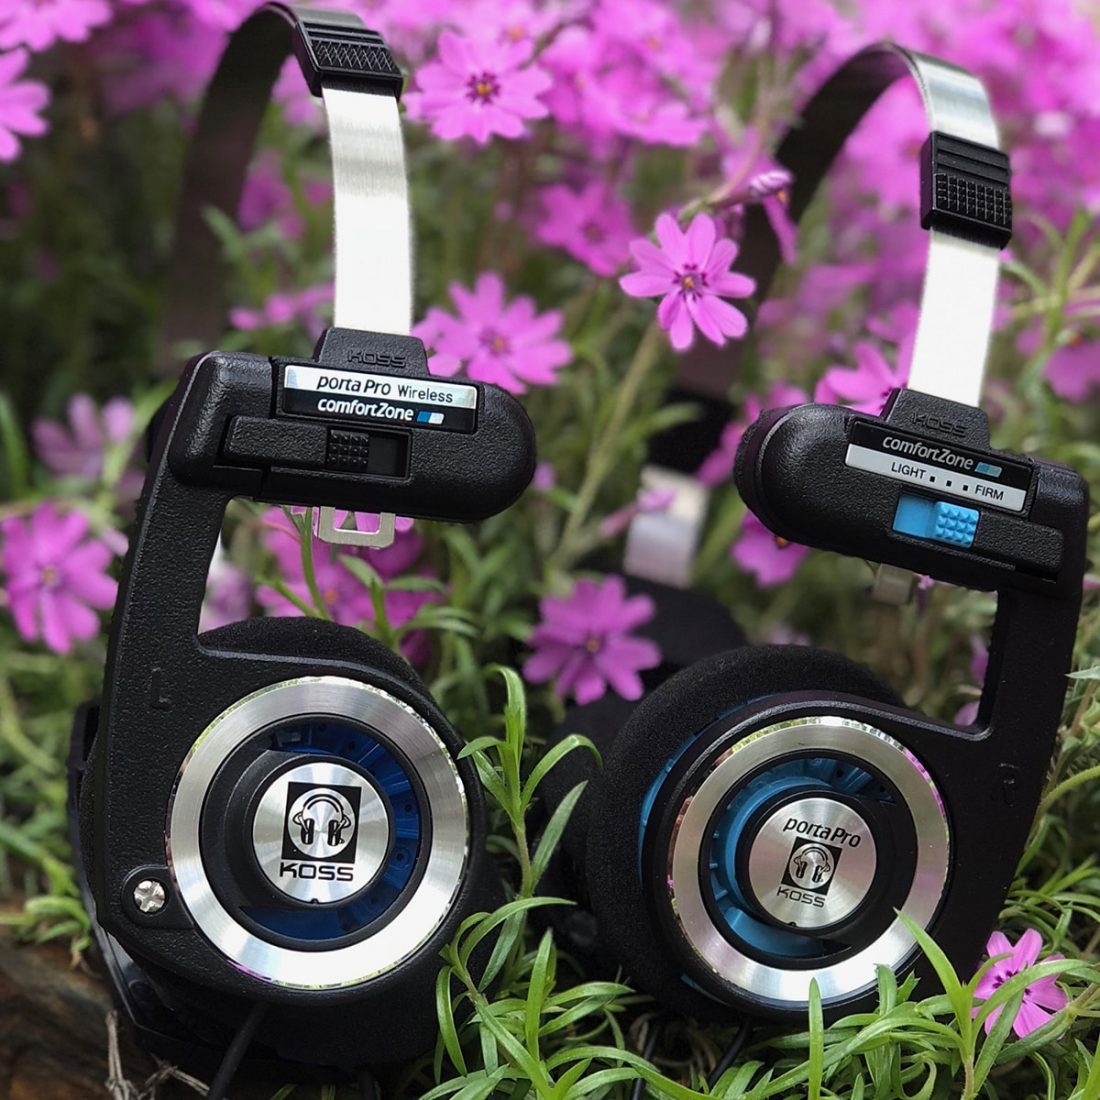 Review: Koss Porta Pro Wireless are the classic headphones plus